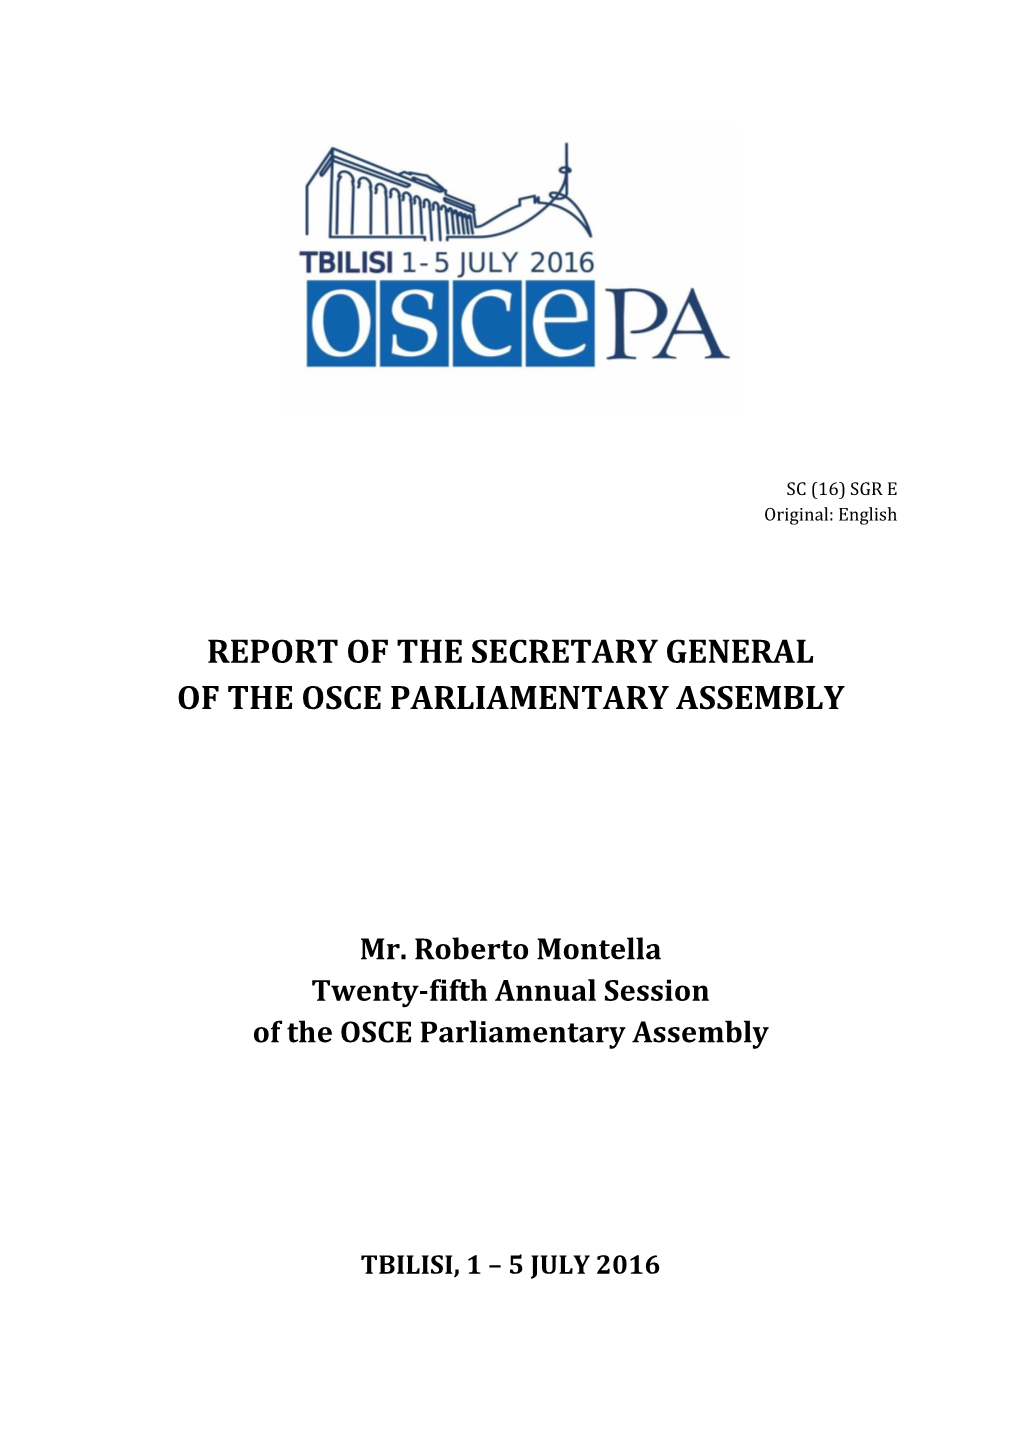 Report of the Secretary General of the Osce Parliamentary Assembly